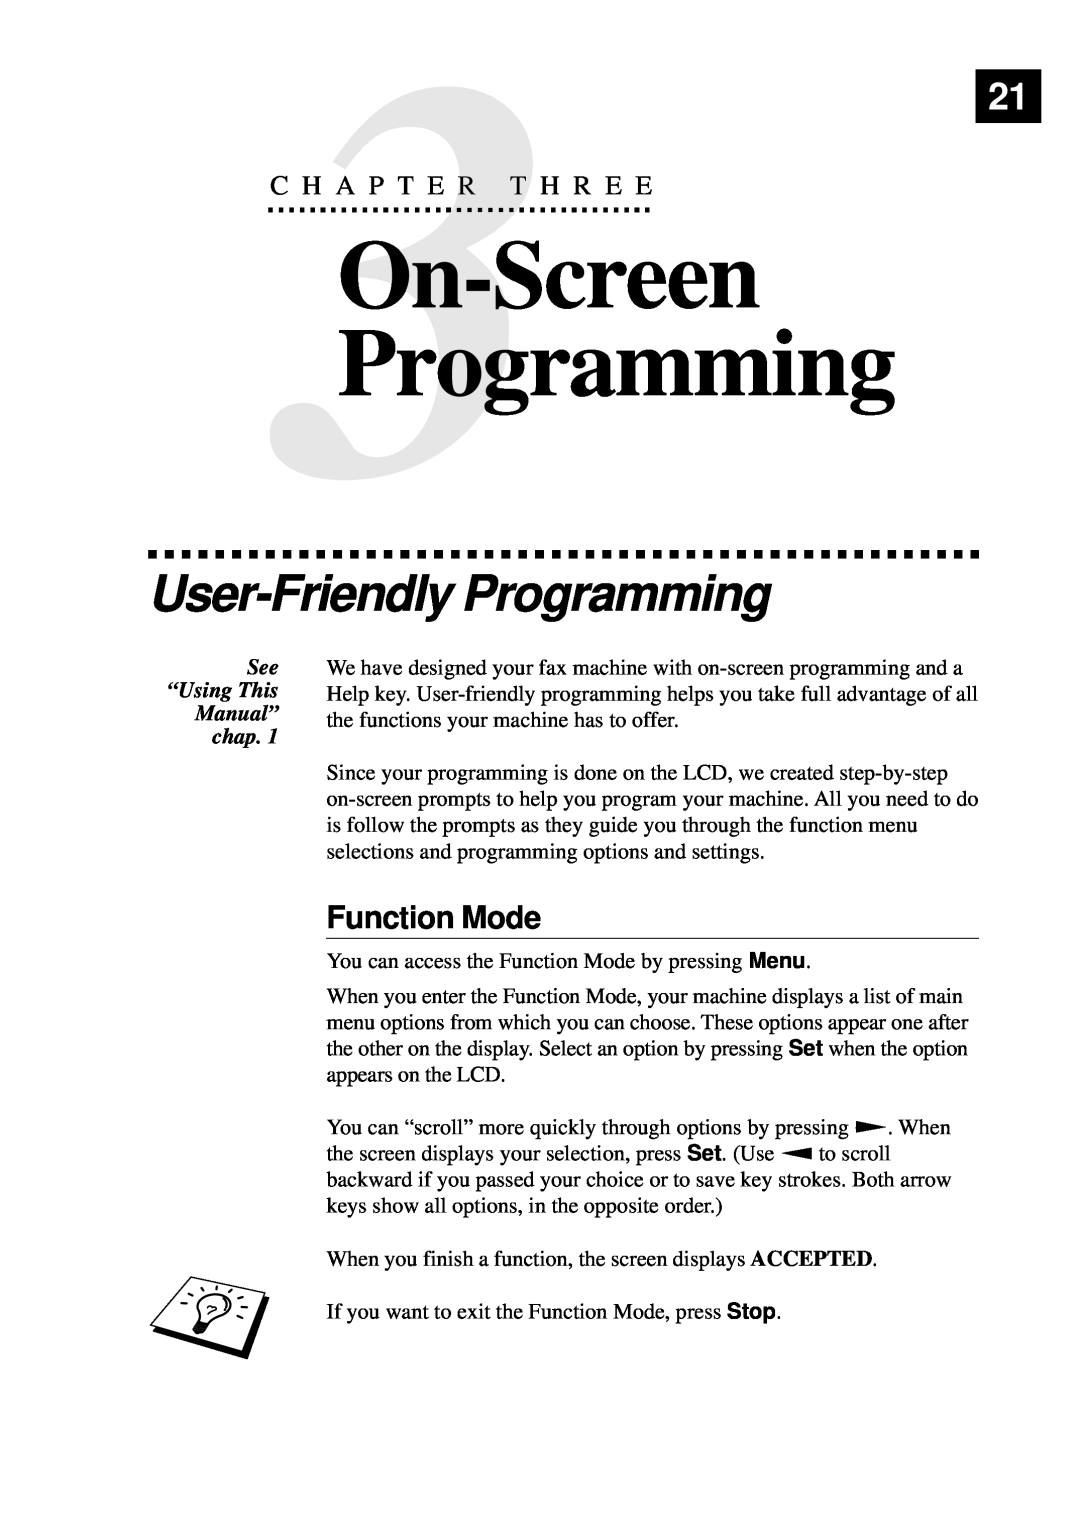 Brother 515 On-Screen, User-Friendly Programming, Function Mode, C H A P T E R T H R E E, See “Using This Manual” chap 